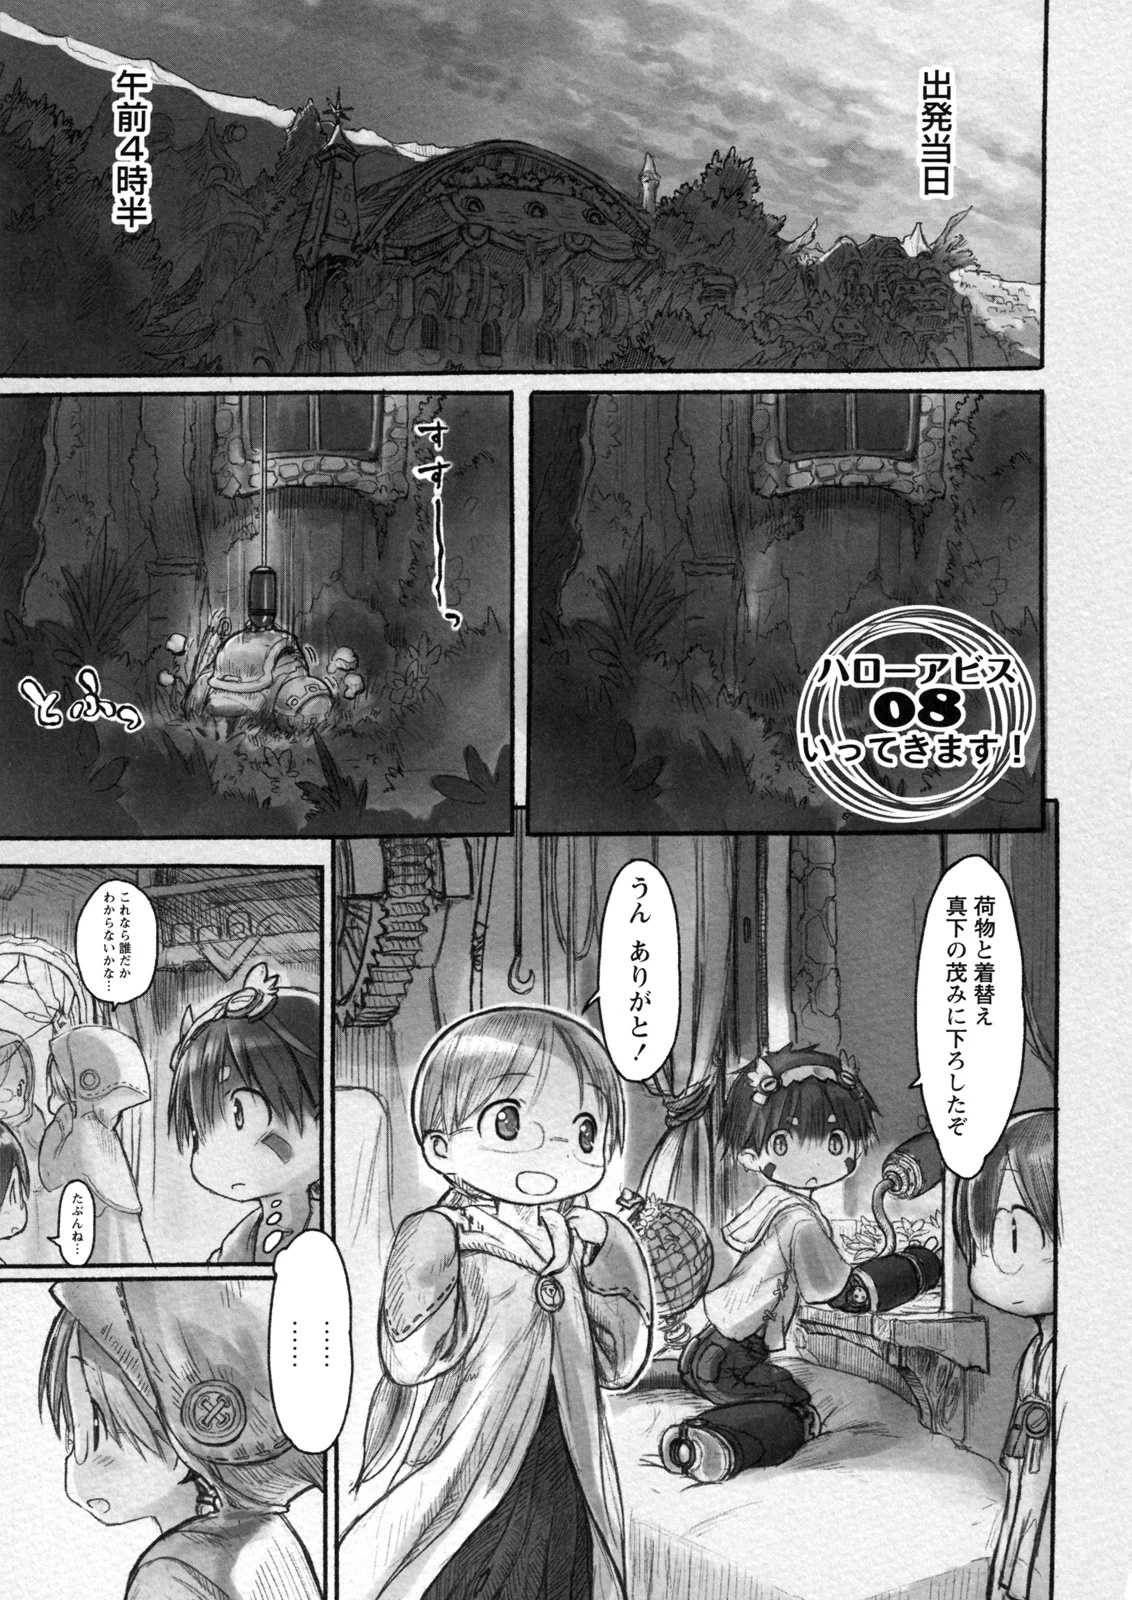 Made in Abyss Chapter 055, Made in Abyss Wiki